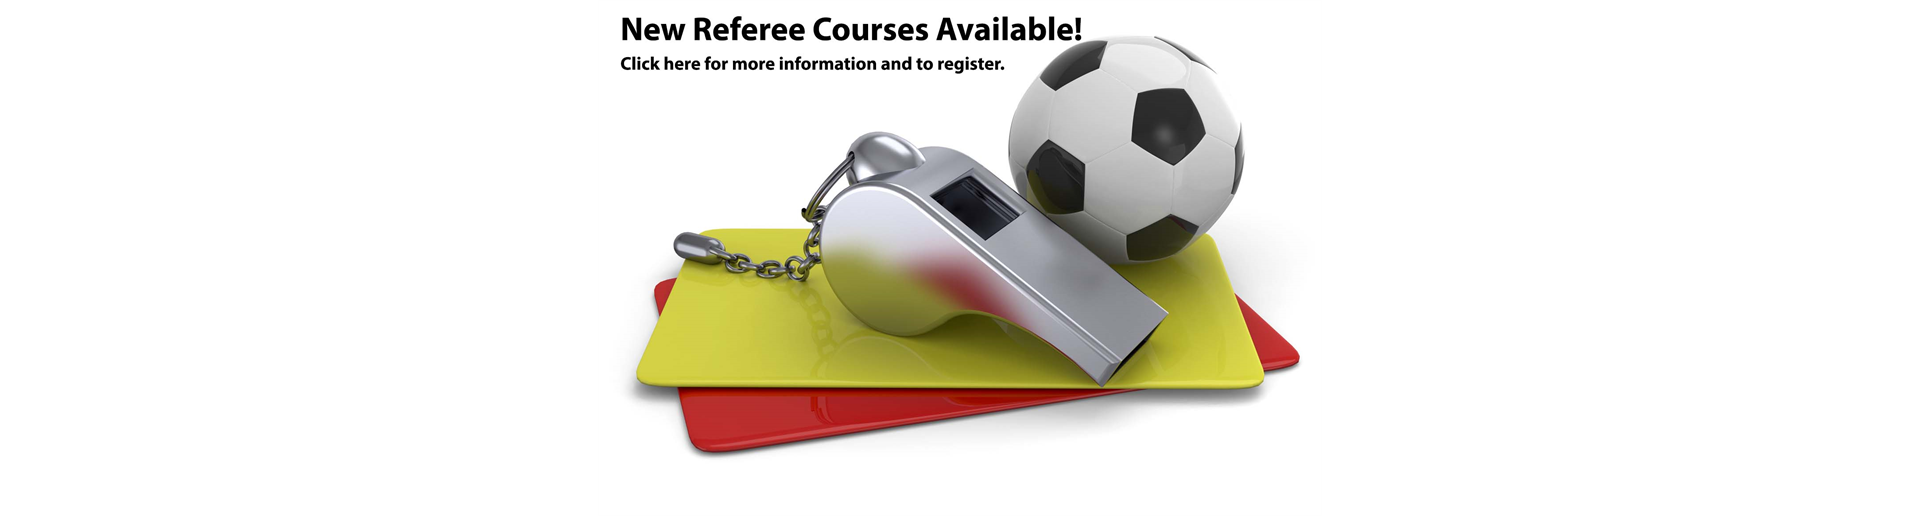 New Referee Course